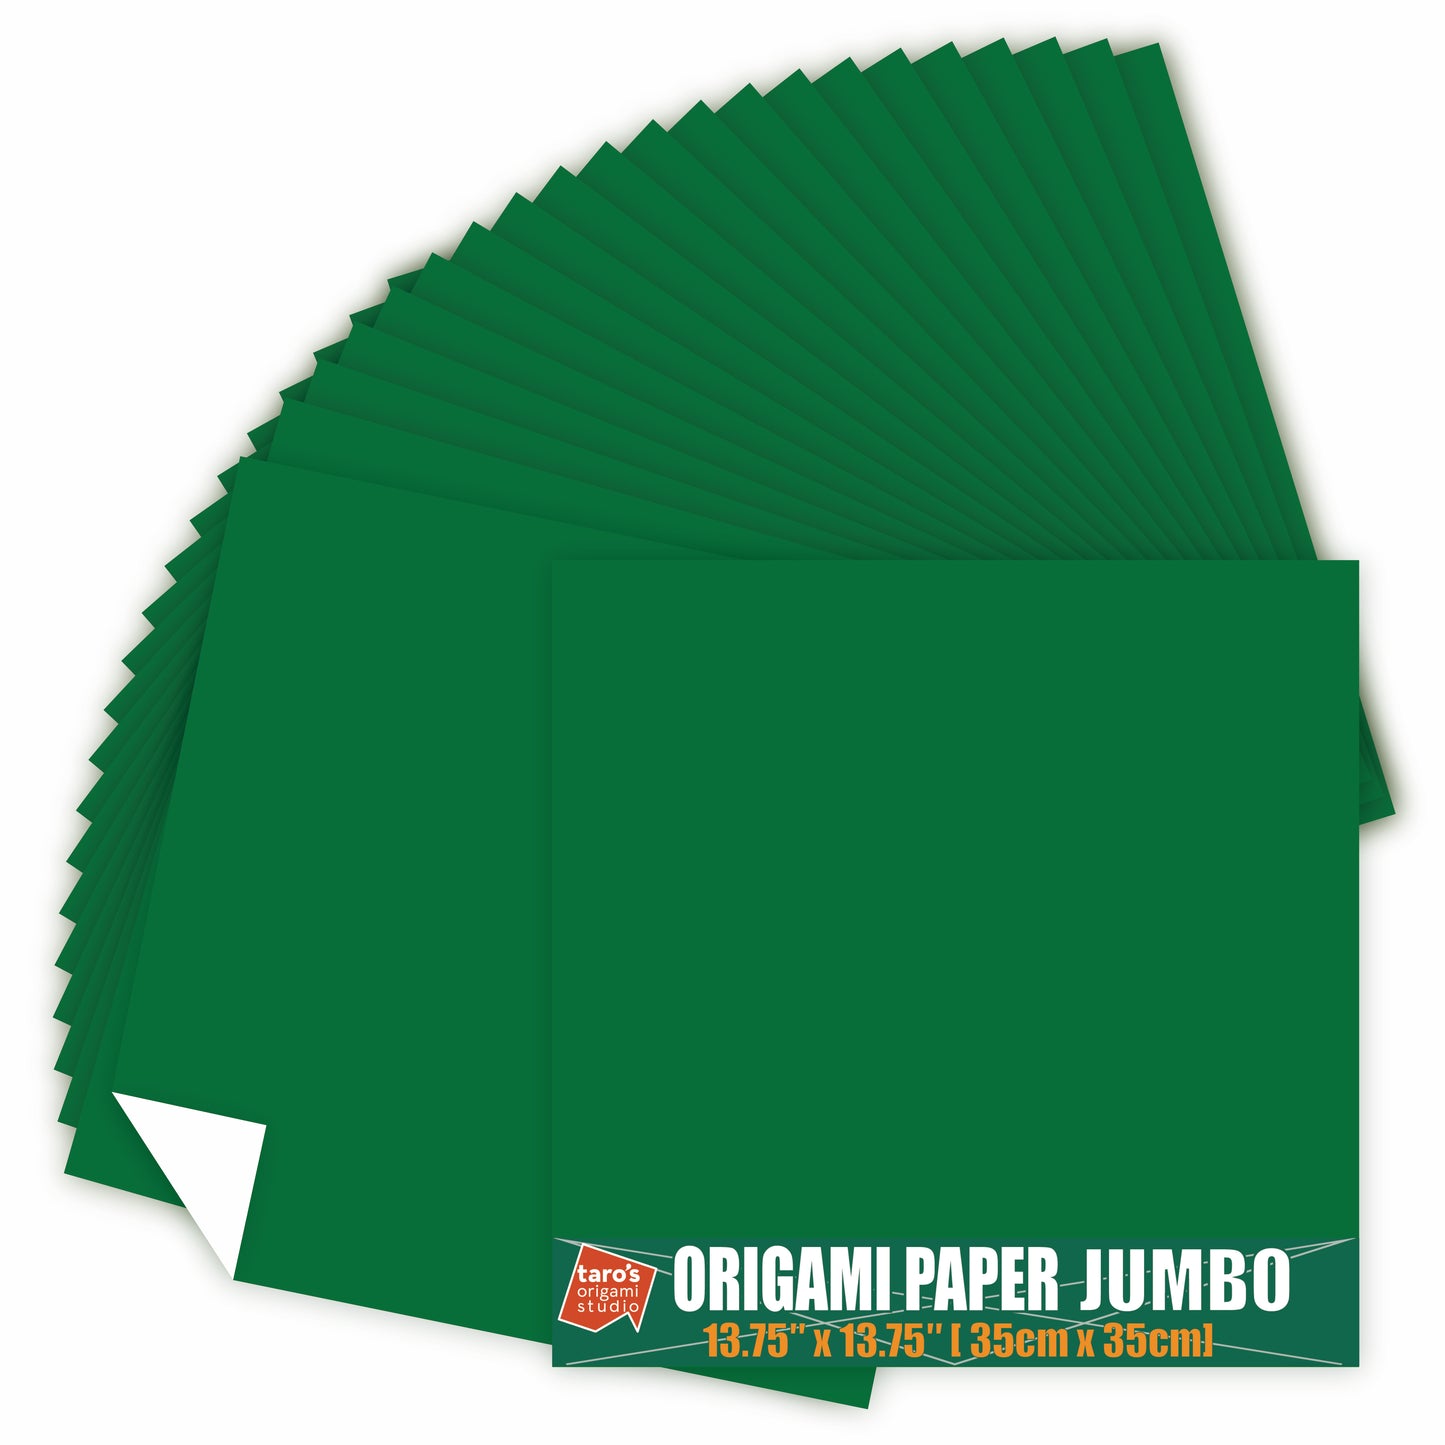 [Taro's Origami Studio] Jumbo 13.75 Inch / 35cm One Sided Single Color (Green) 25 Sheets (All Same Color) Square Easy Fold Premium Japanese Paper (Made in Japan)